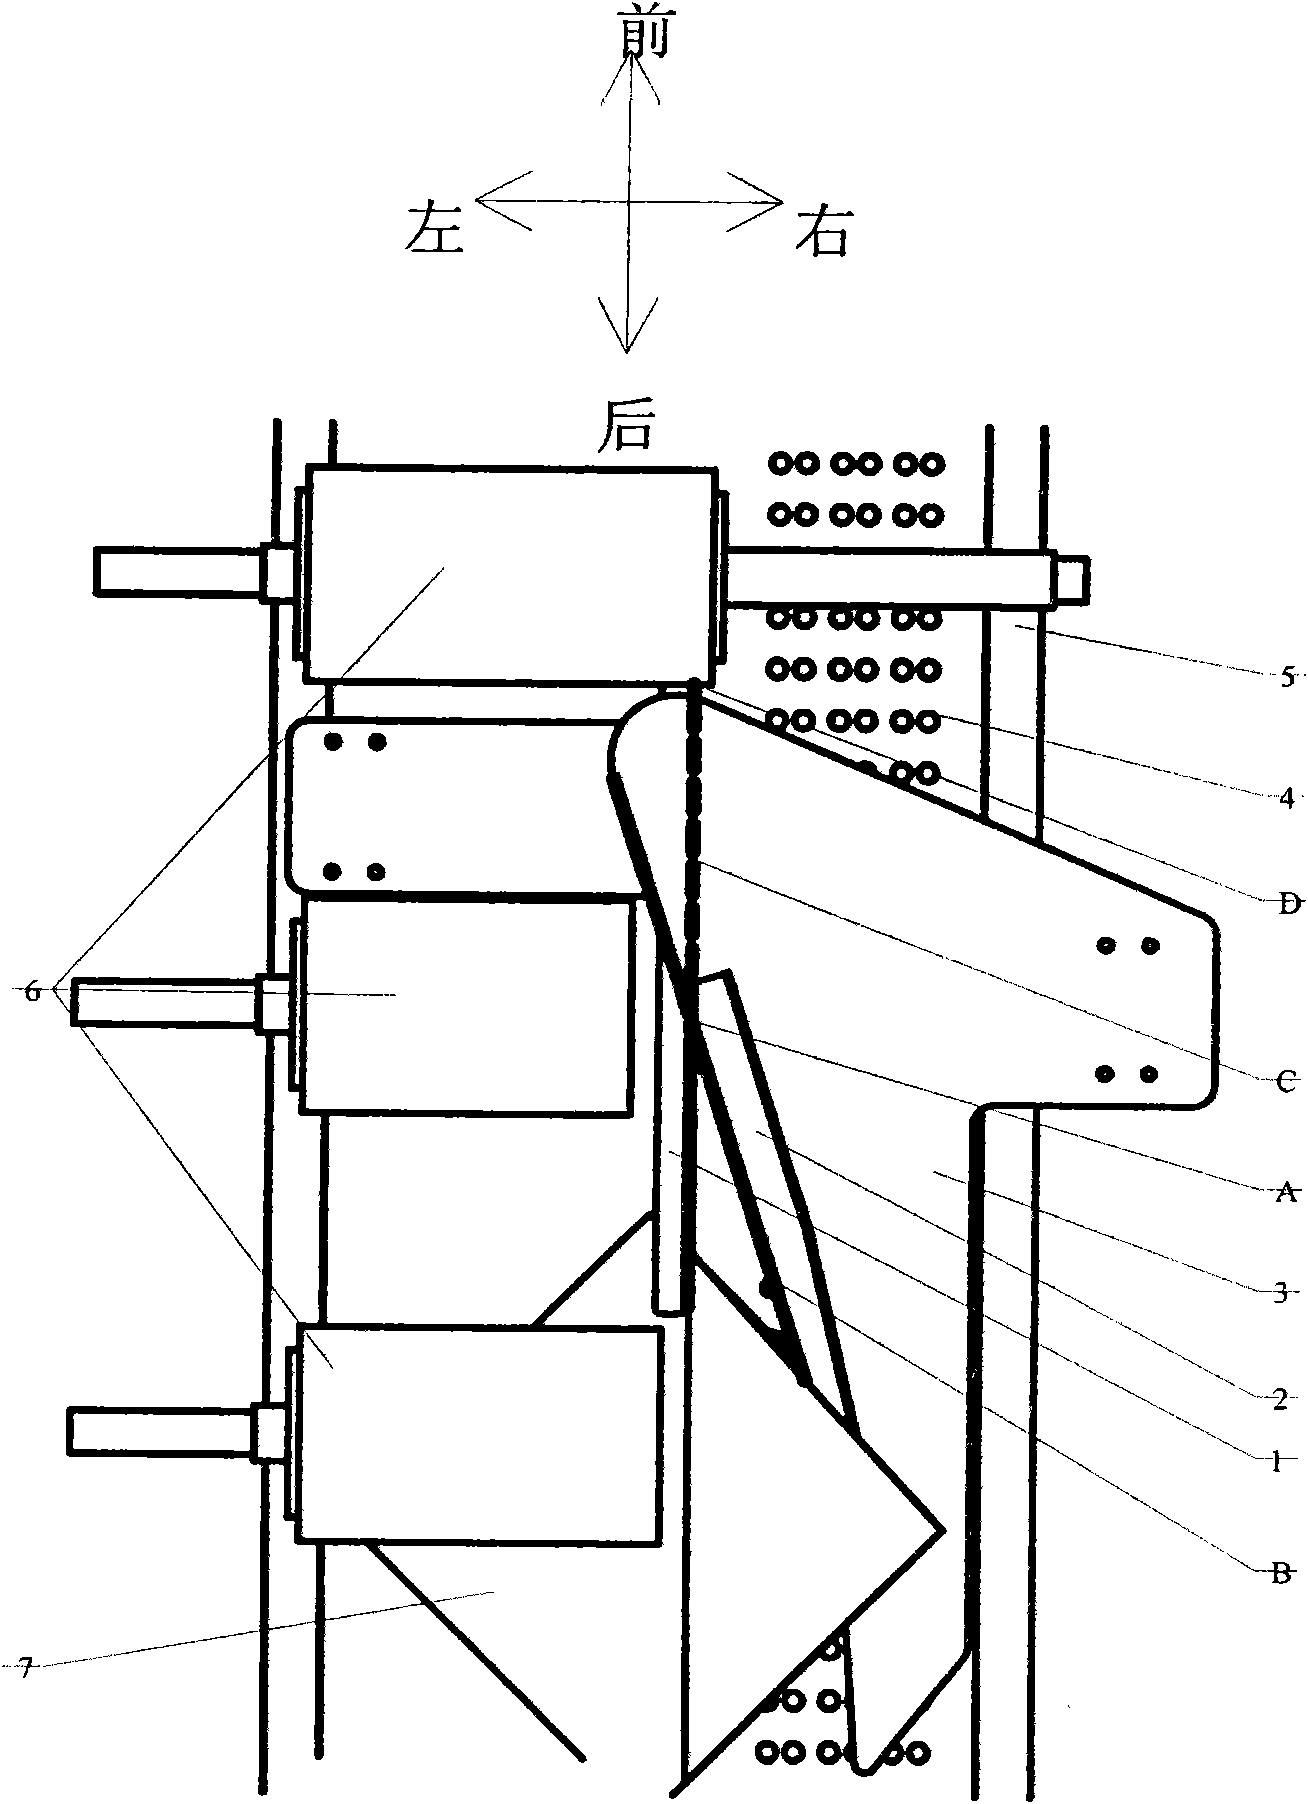 Device for folding tissue paper of tissue paper making machine